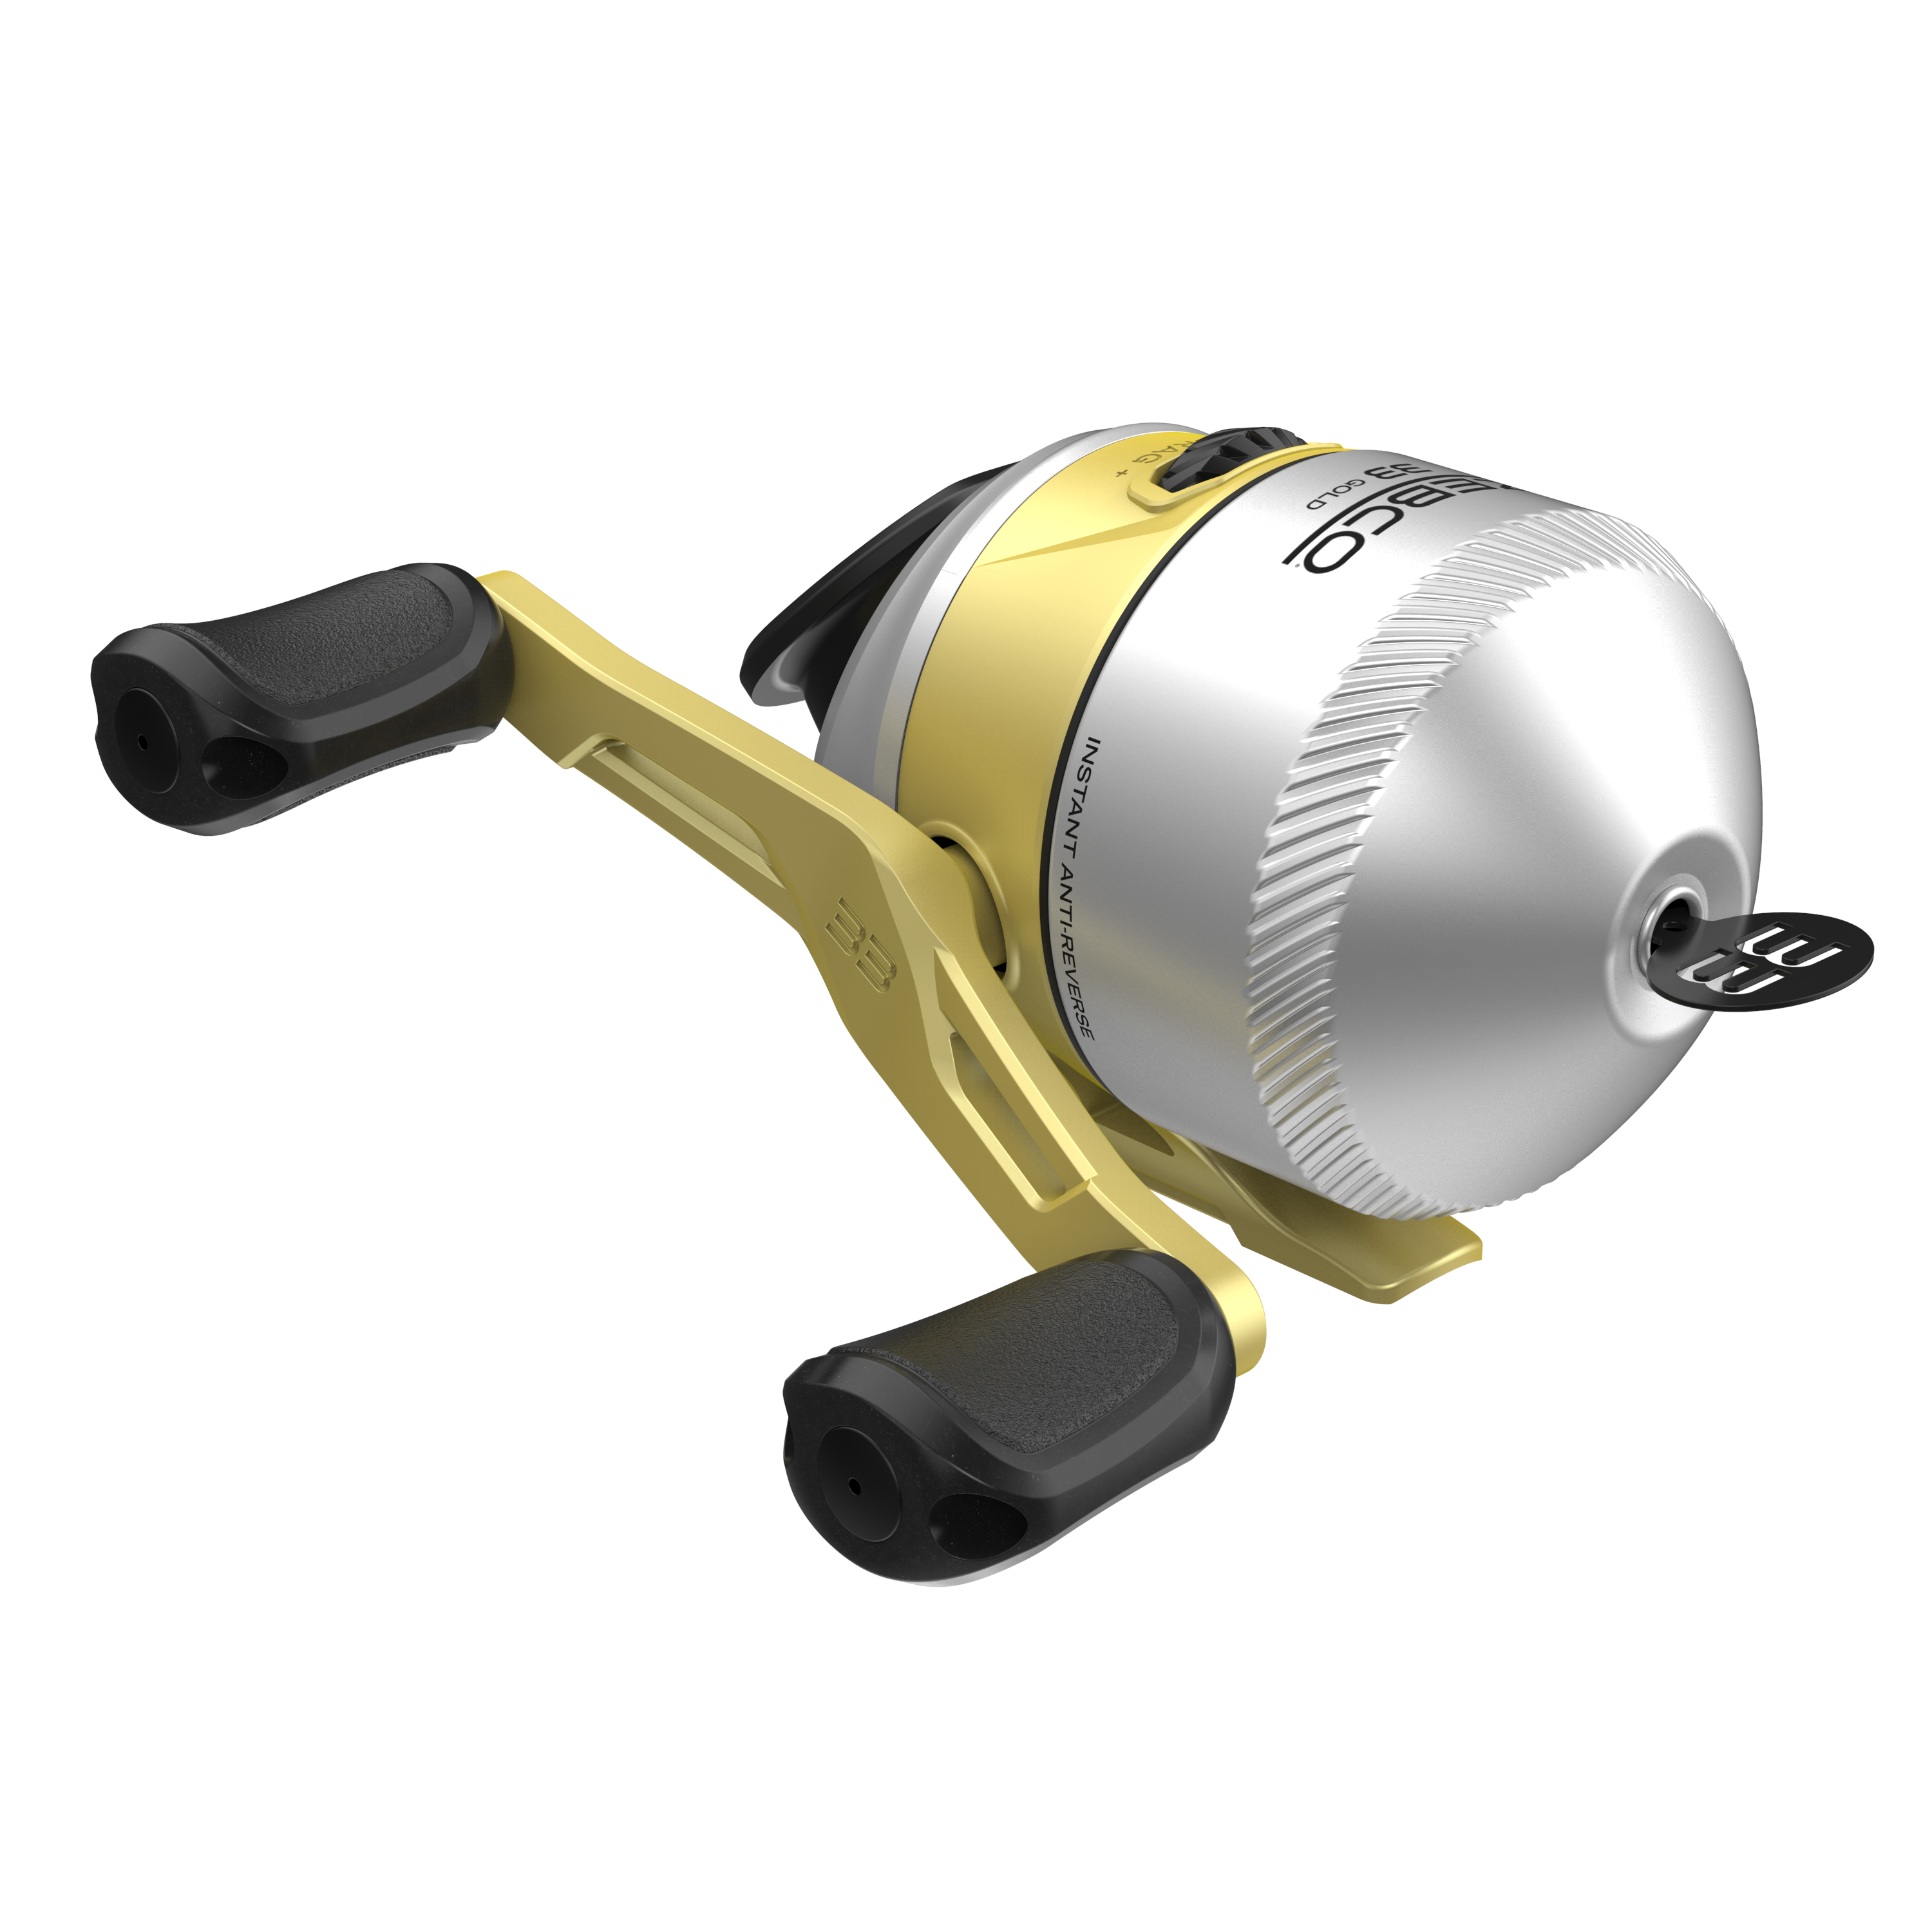  Customer reviews: Zebco 33 Micro Spincast Reel and